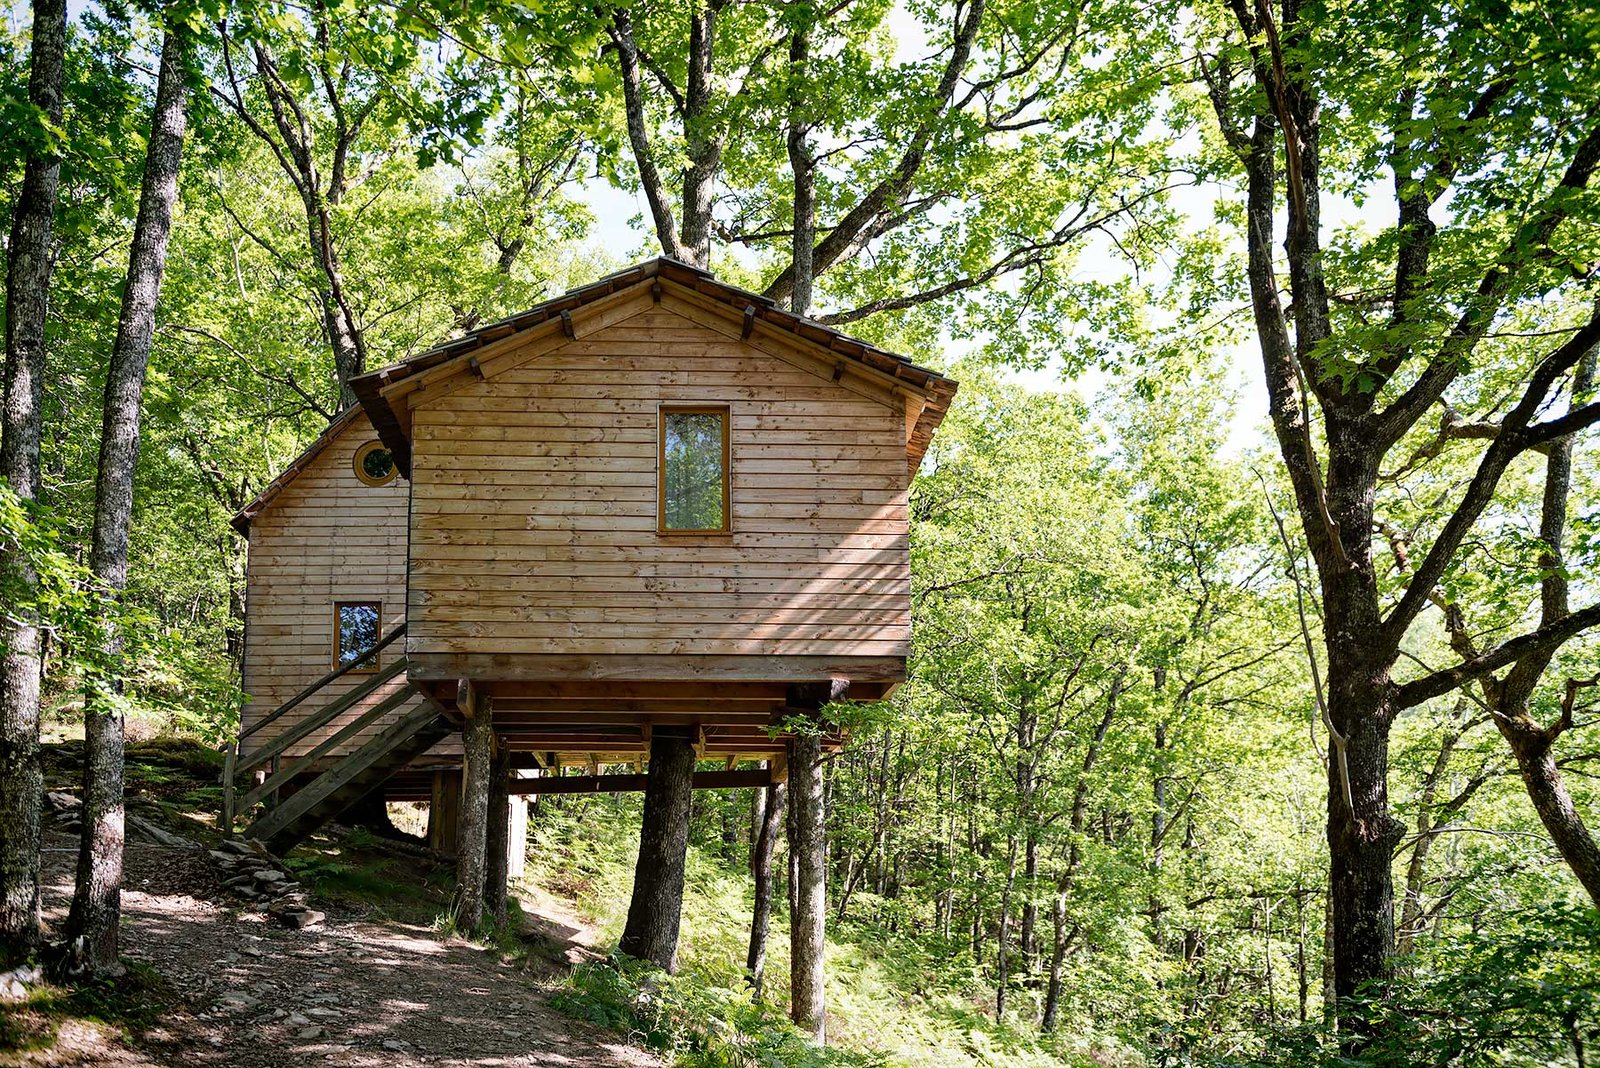 Sleeping in Corrèze: Tree House or Boutique Hotel?